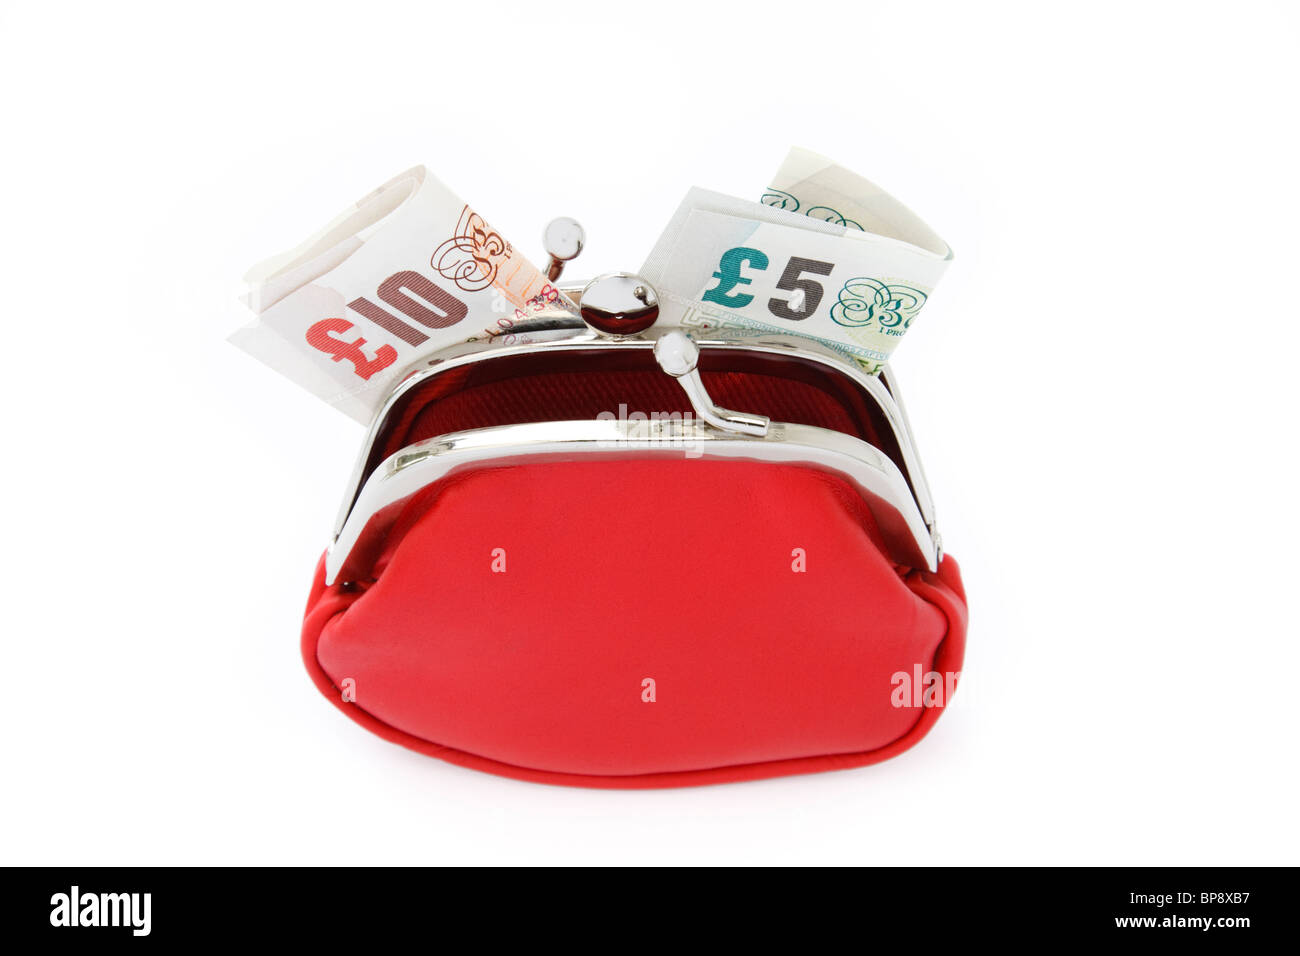 Red money purse containing ten pound and five pound notes isolated on a plain white background. UK, Britain Stock Photo